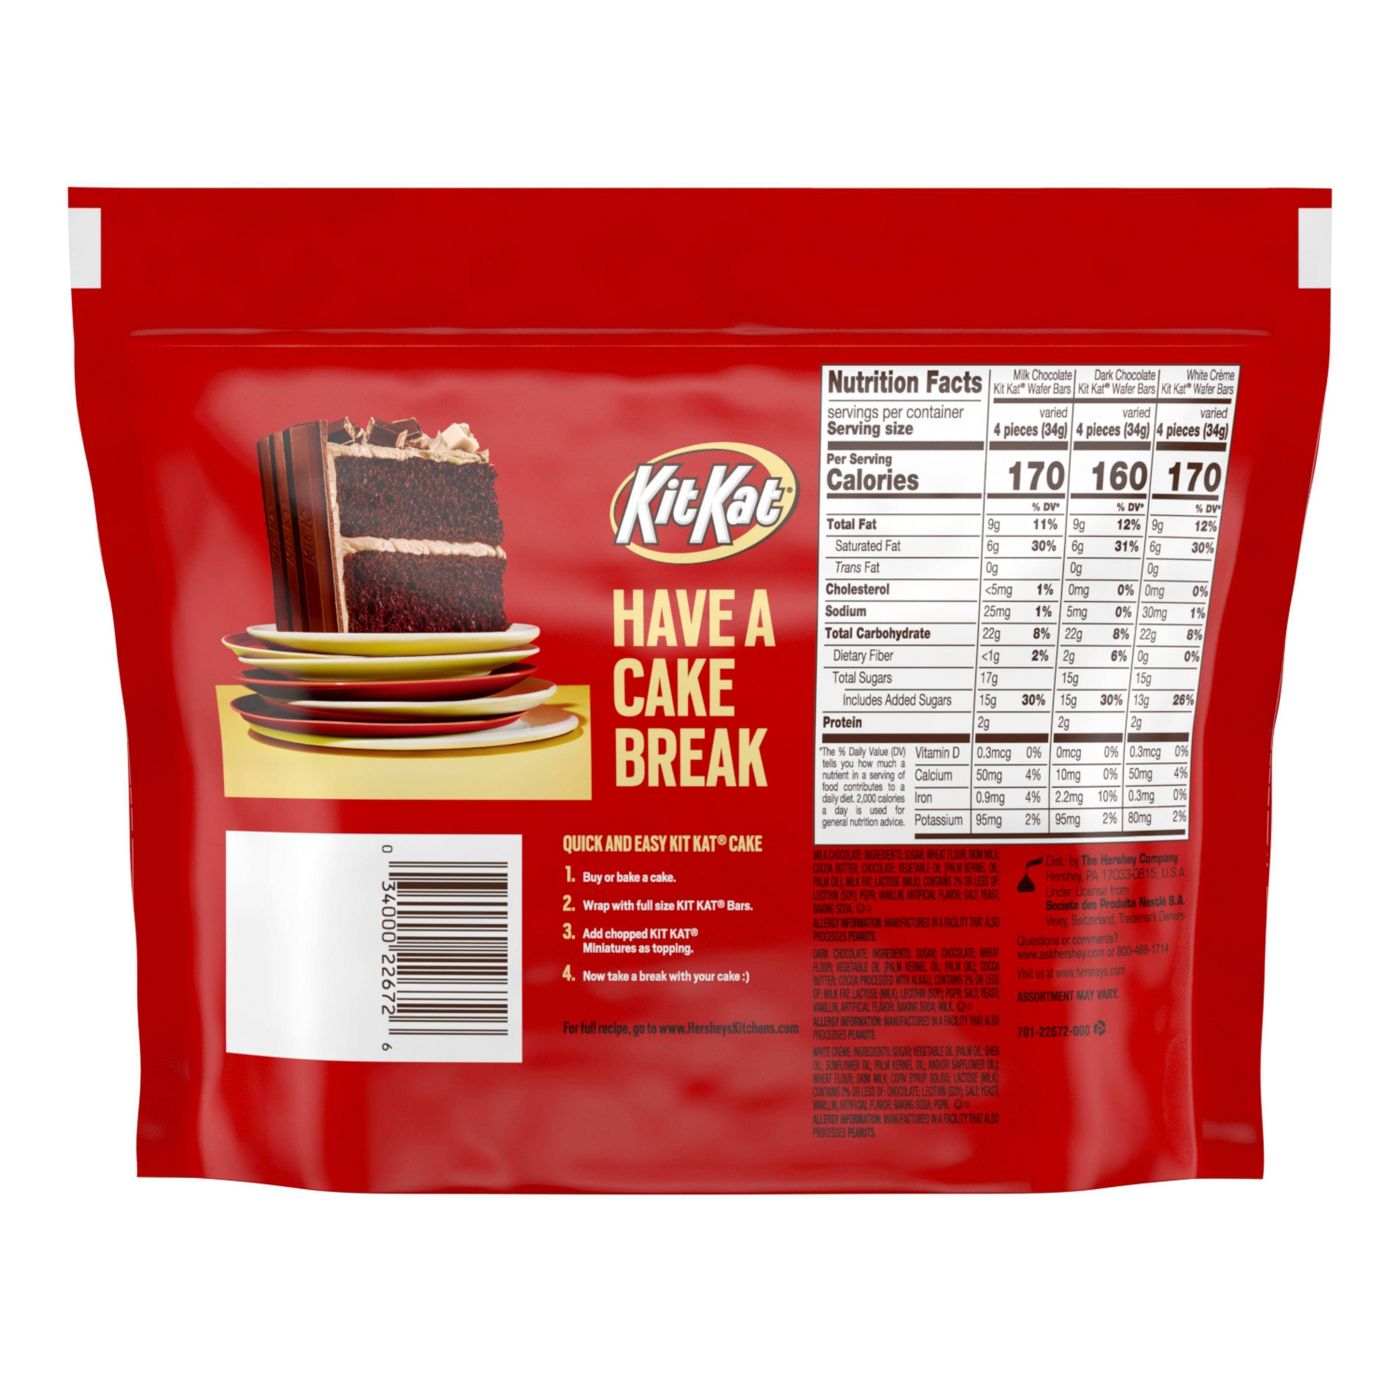 Kit Kat Assorted Miniatures Chocolate Candy, Share Pack, 10.1oz